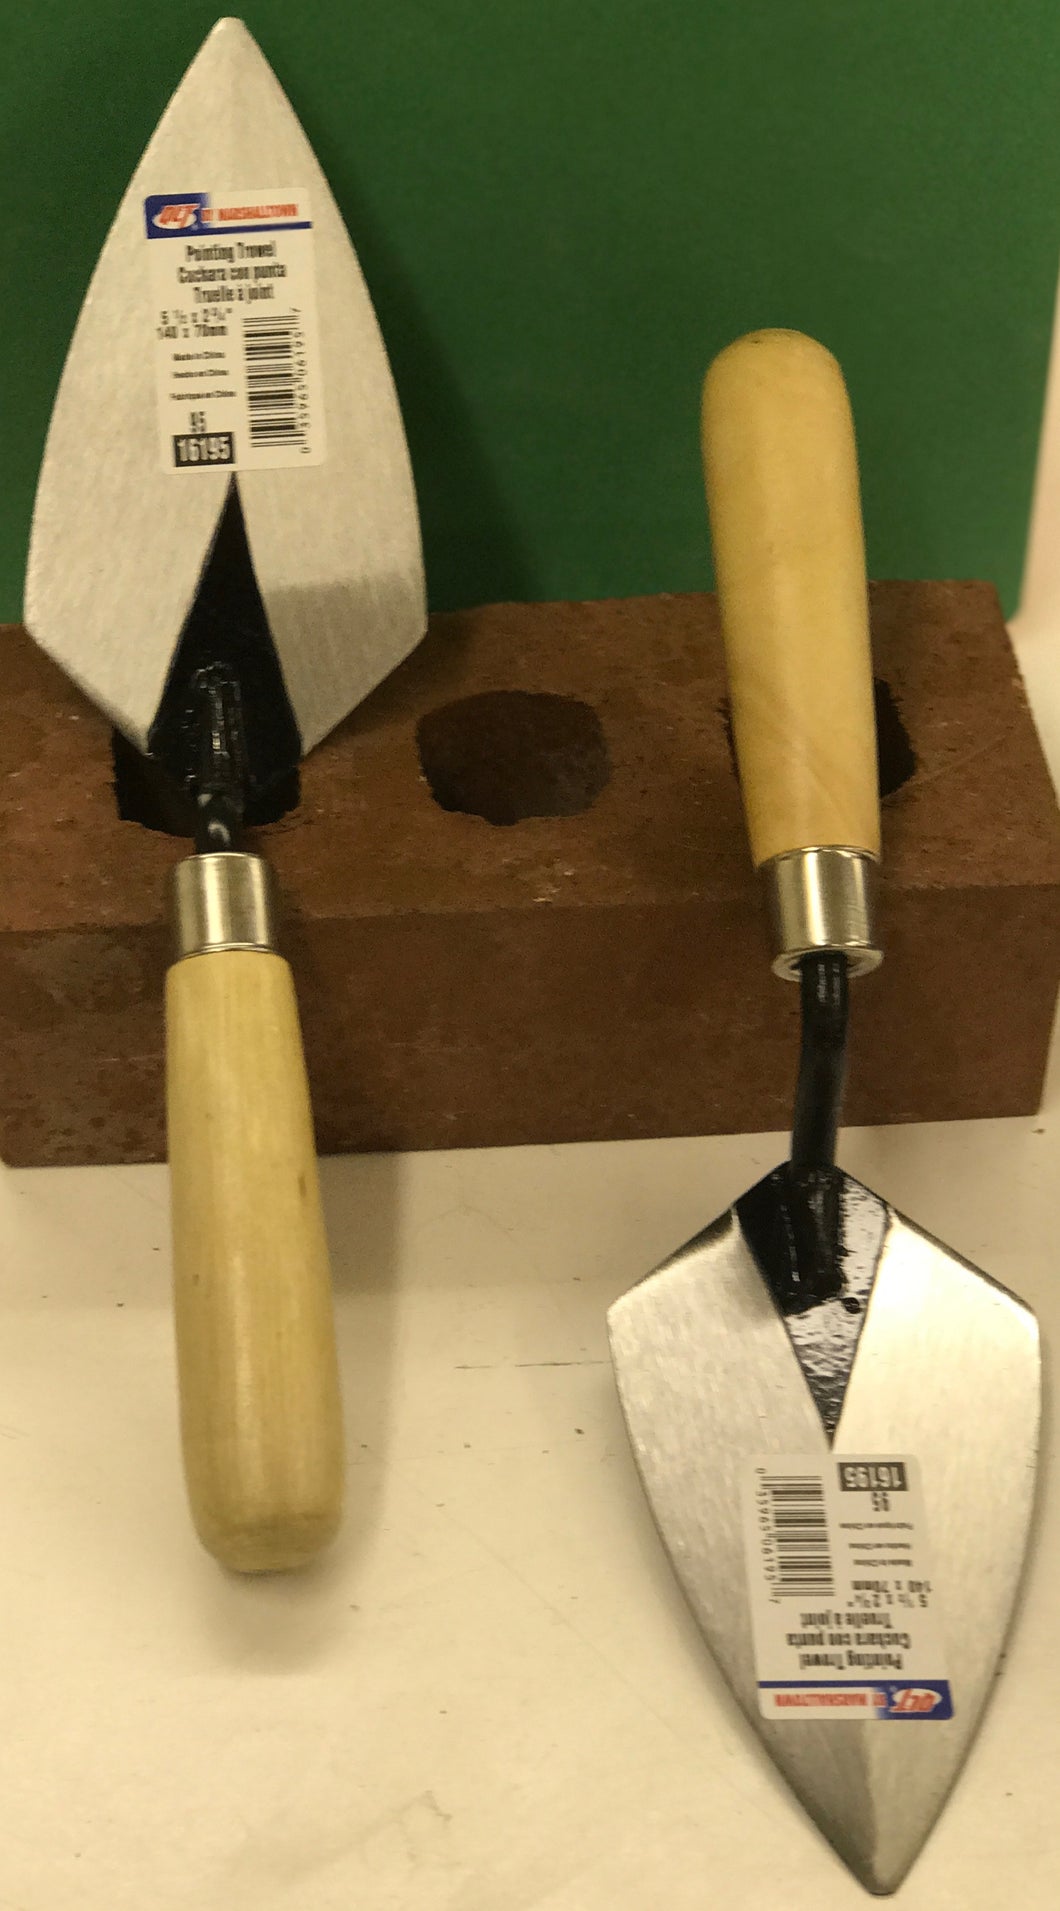 QLT by Marshalltown: Pointing trowels